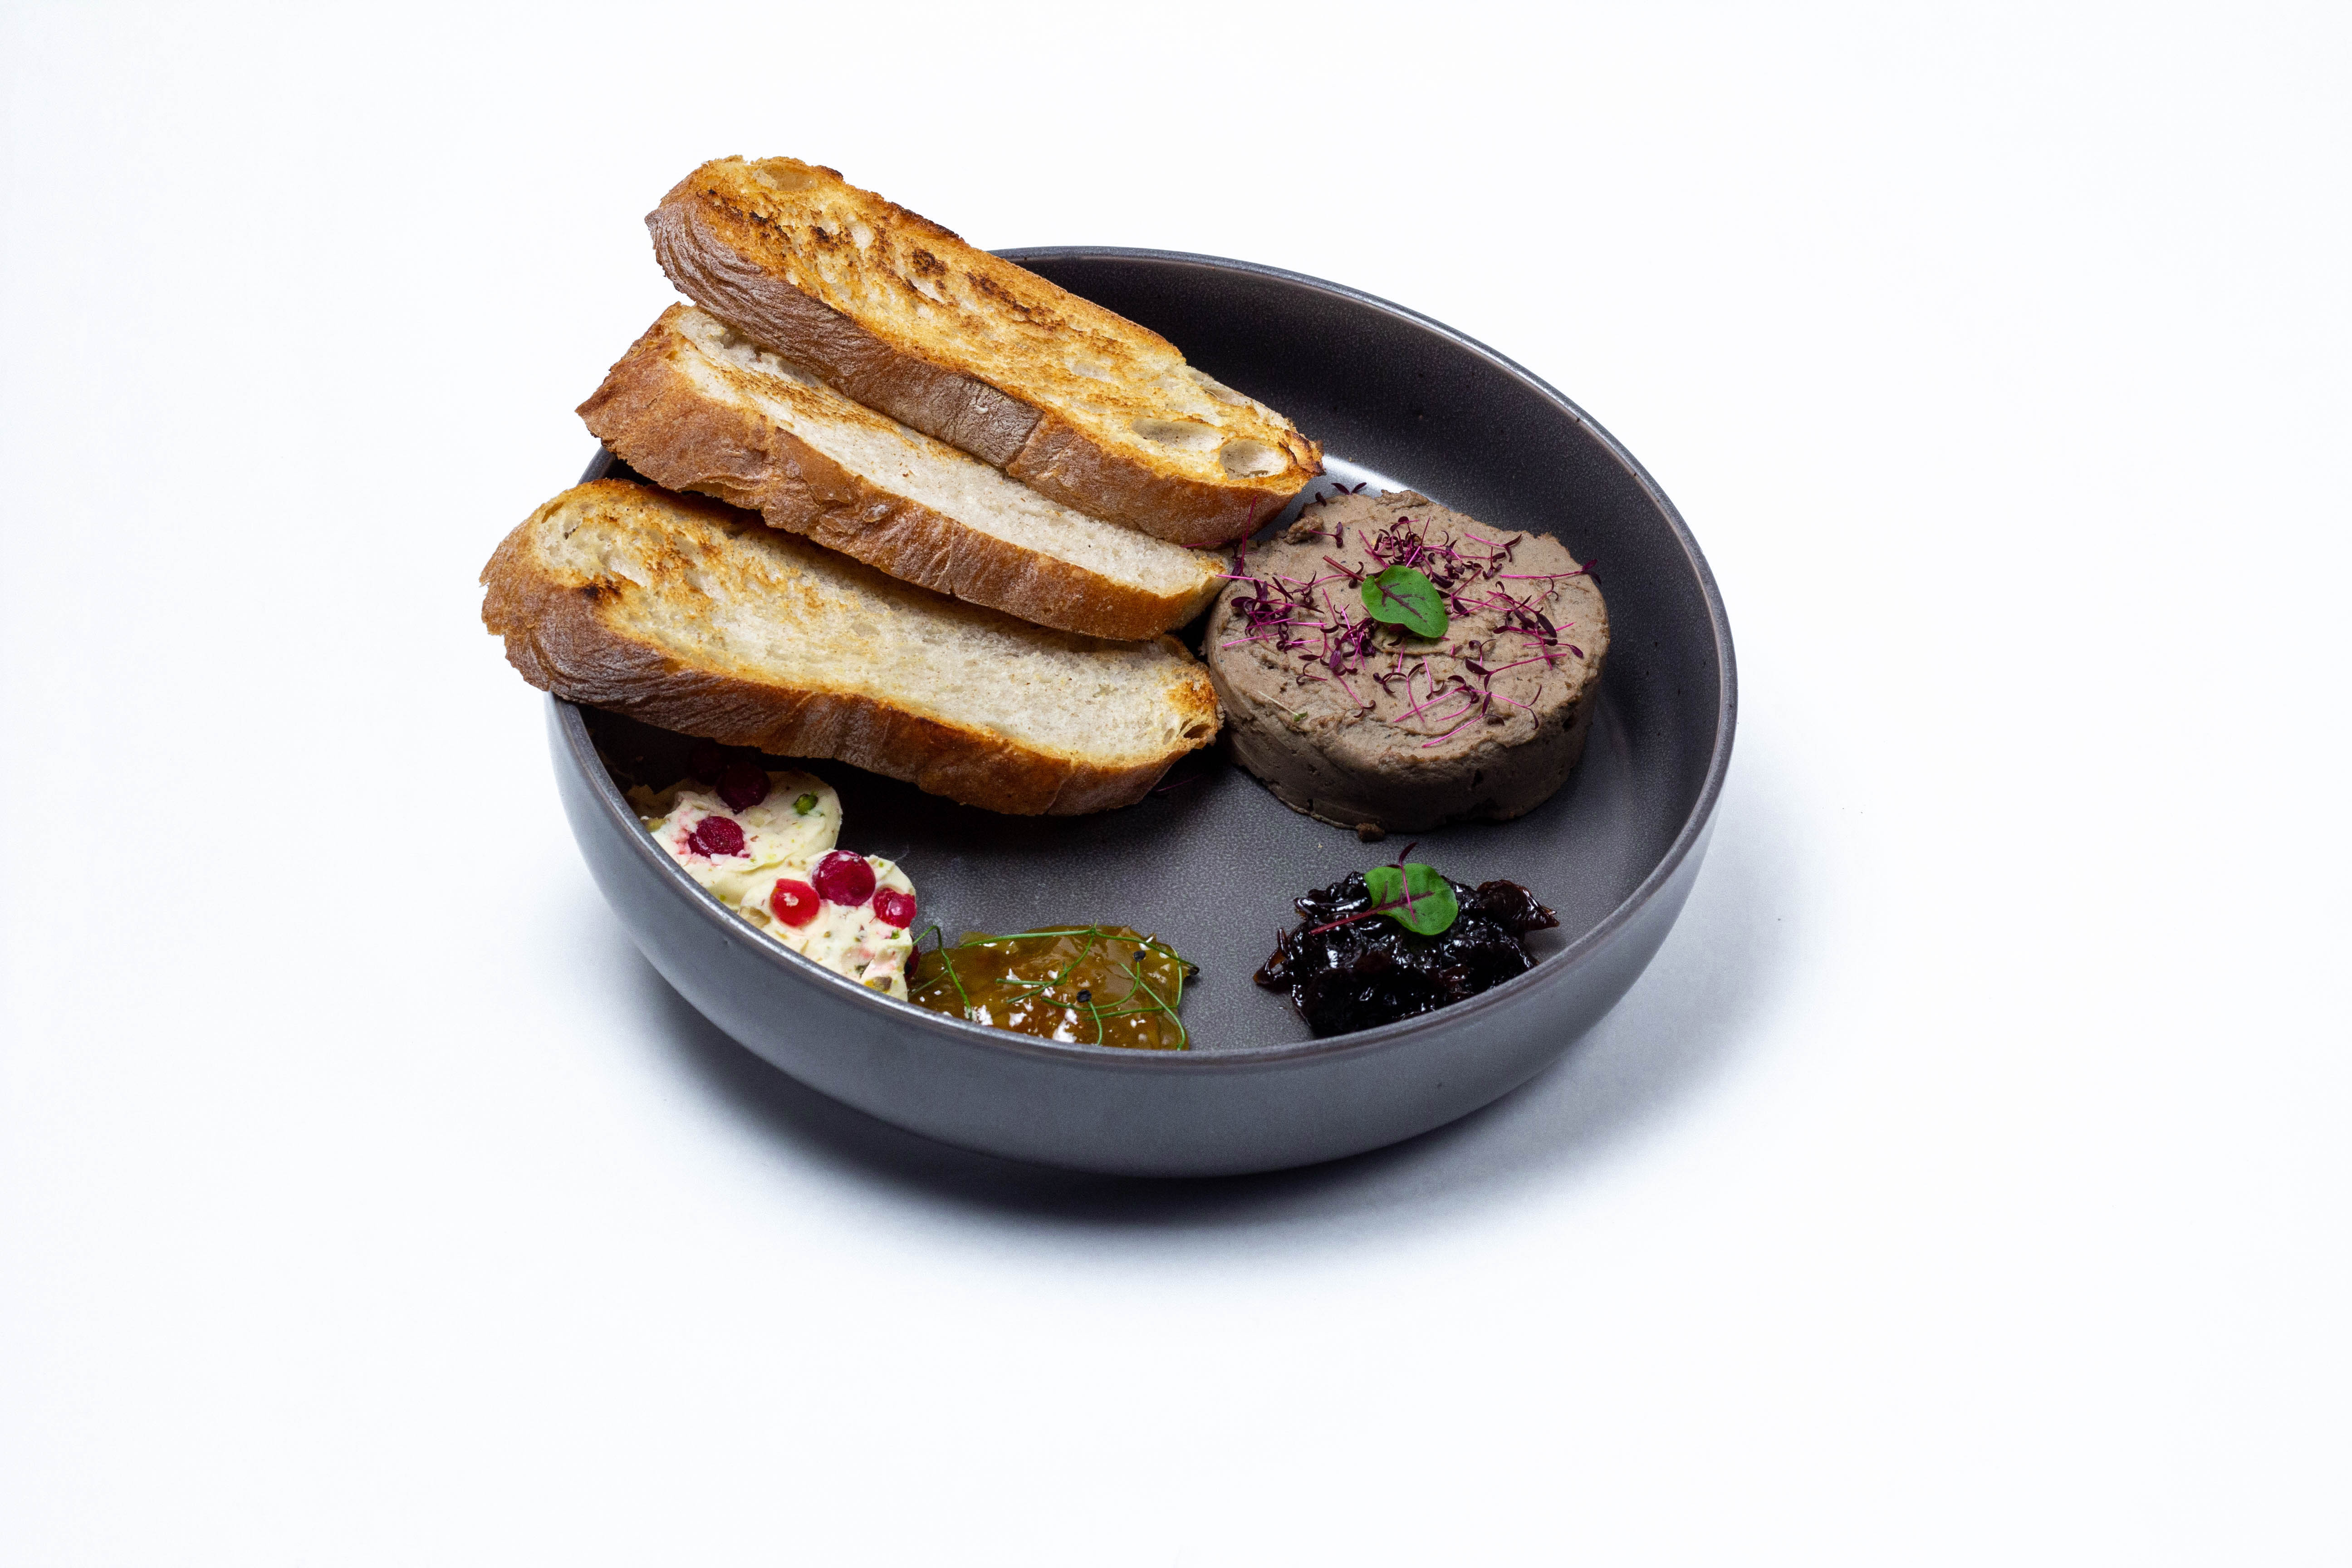 <span style="color: rgb(0, 0, 0);">Chicken pate with caramelized onion, orange jam, ciabatta and butter with fresh currants and almonds</span>